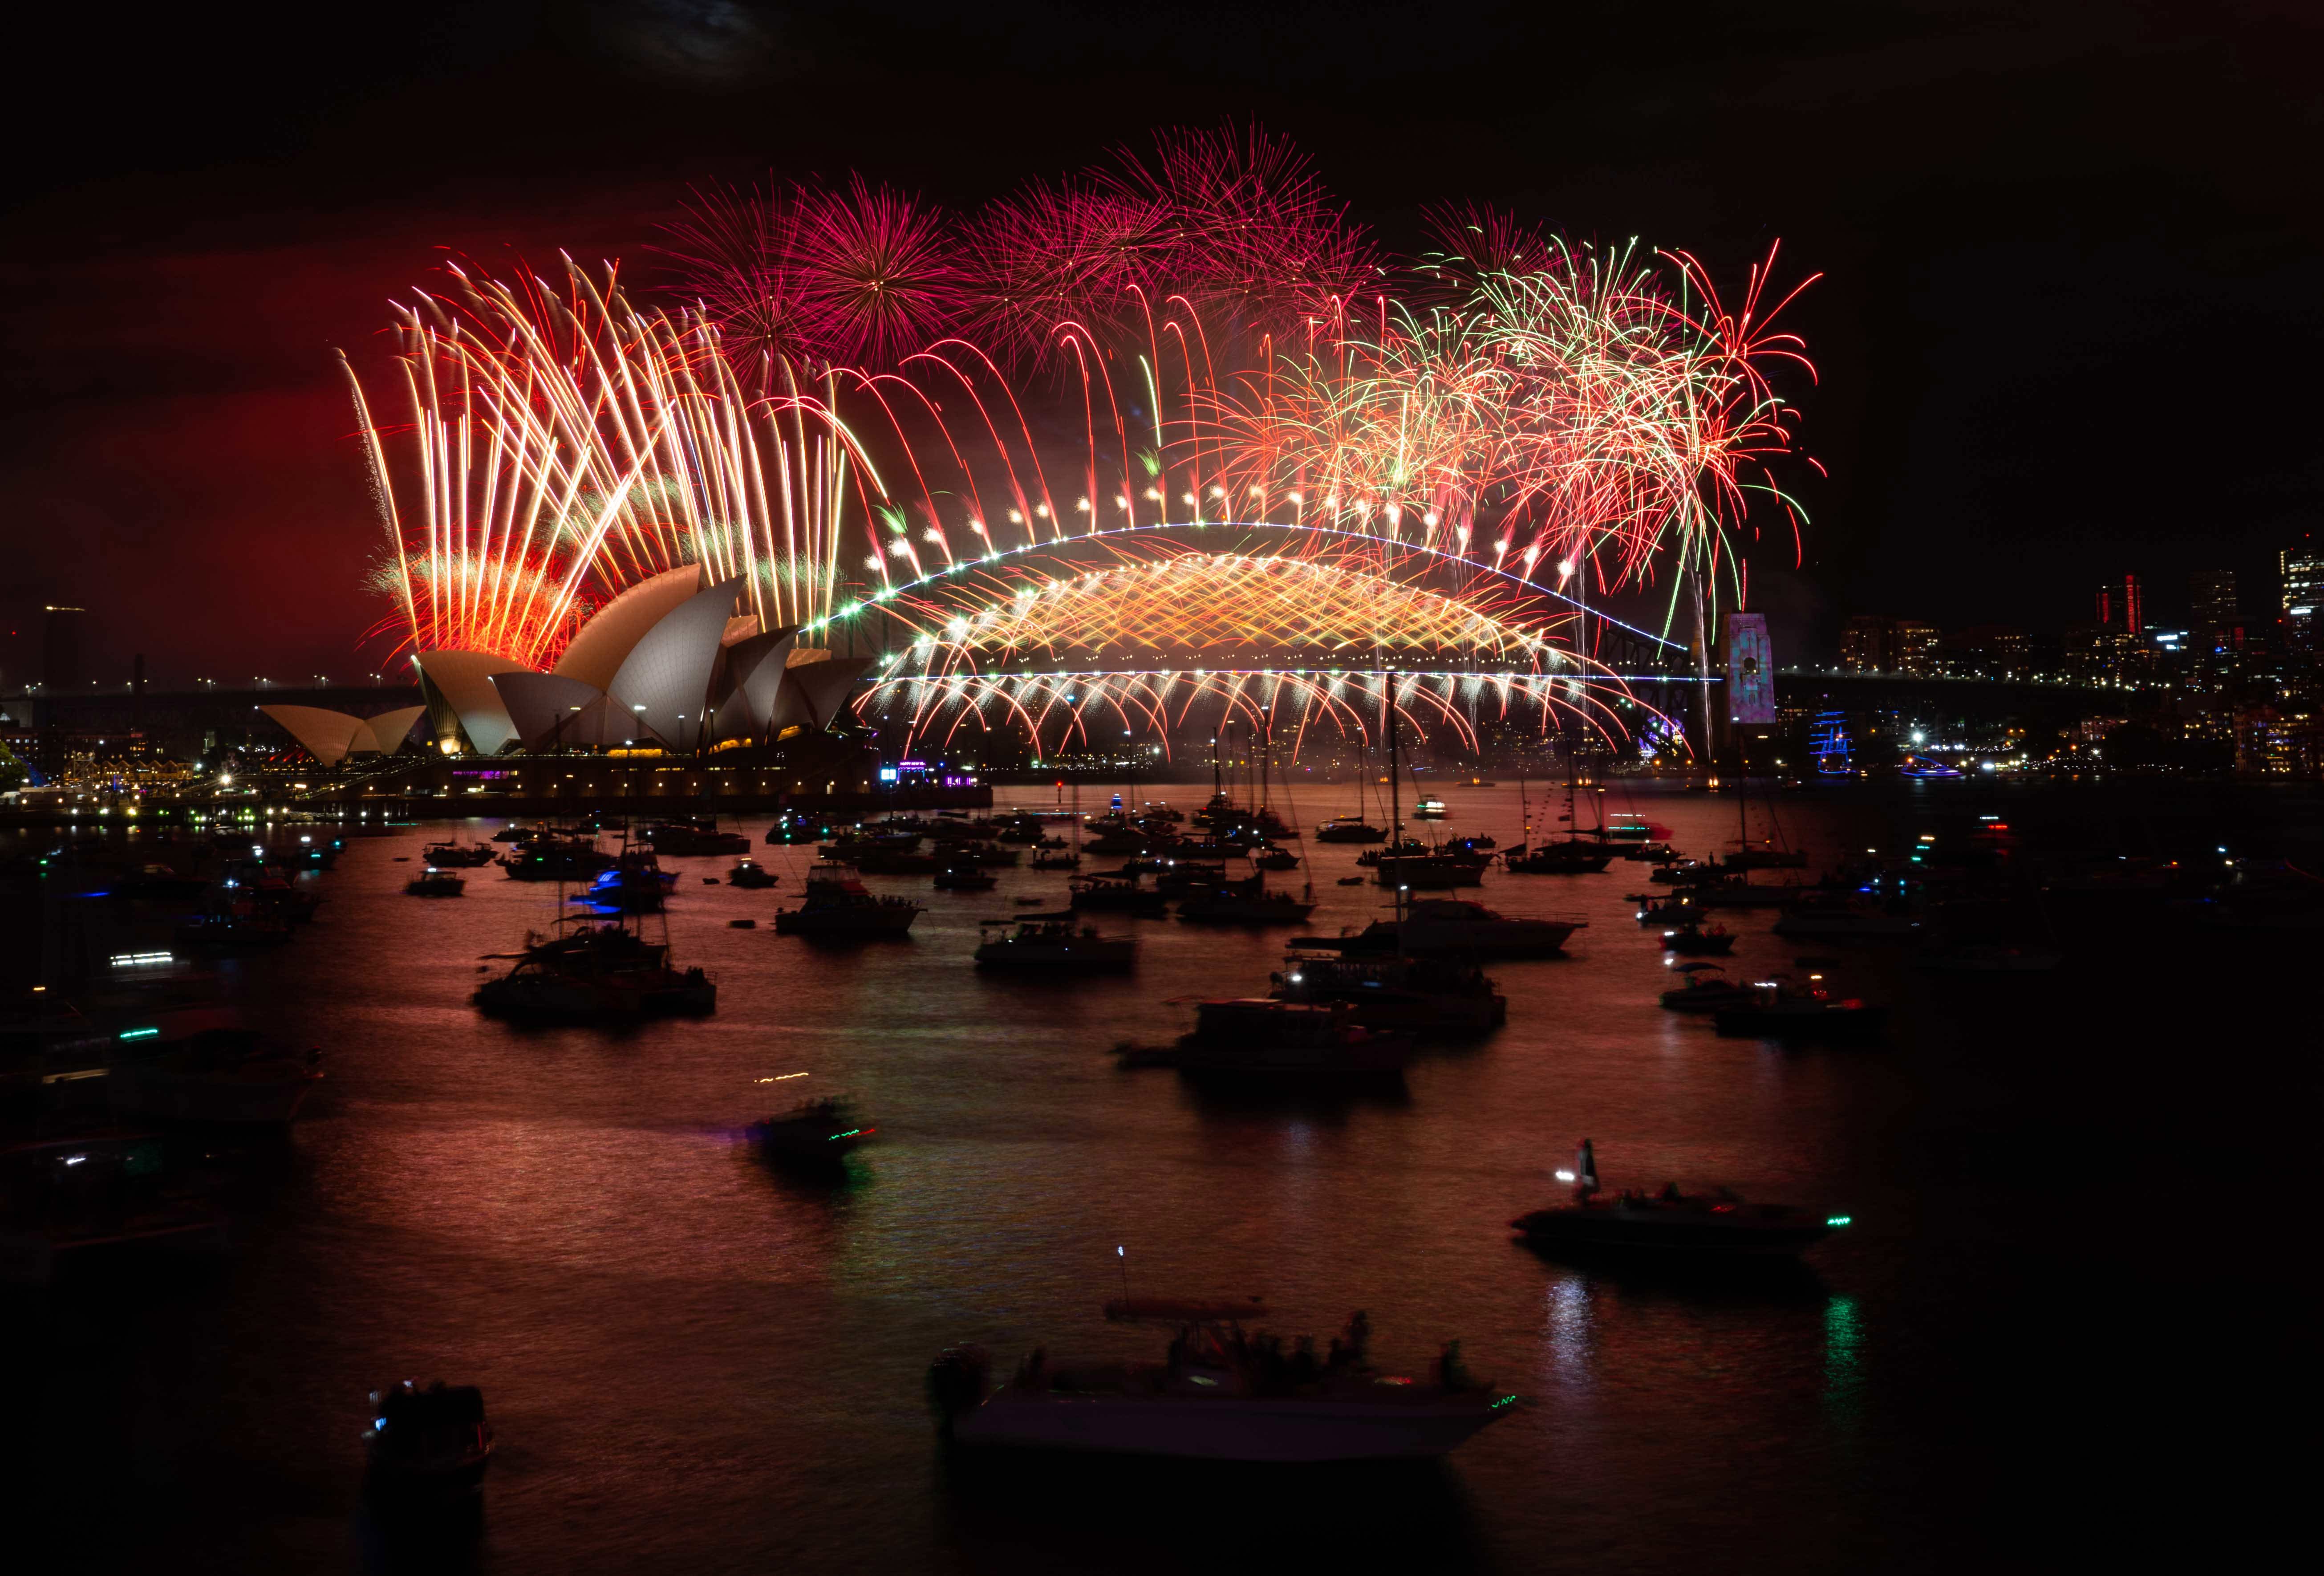 Fireworks light up the skies above Sydney Harbour at midnight on New Year's Eve. 31st December 2022 